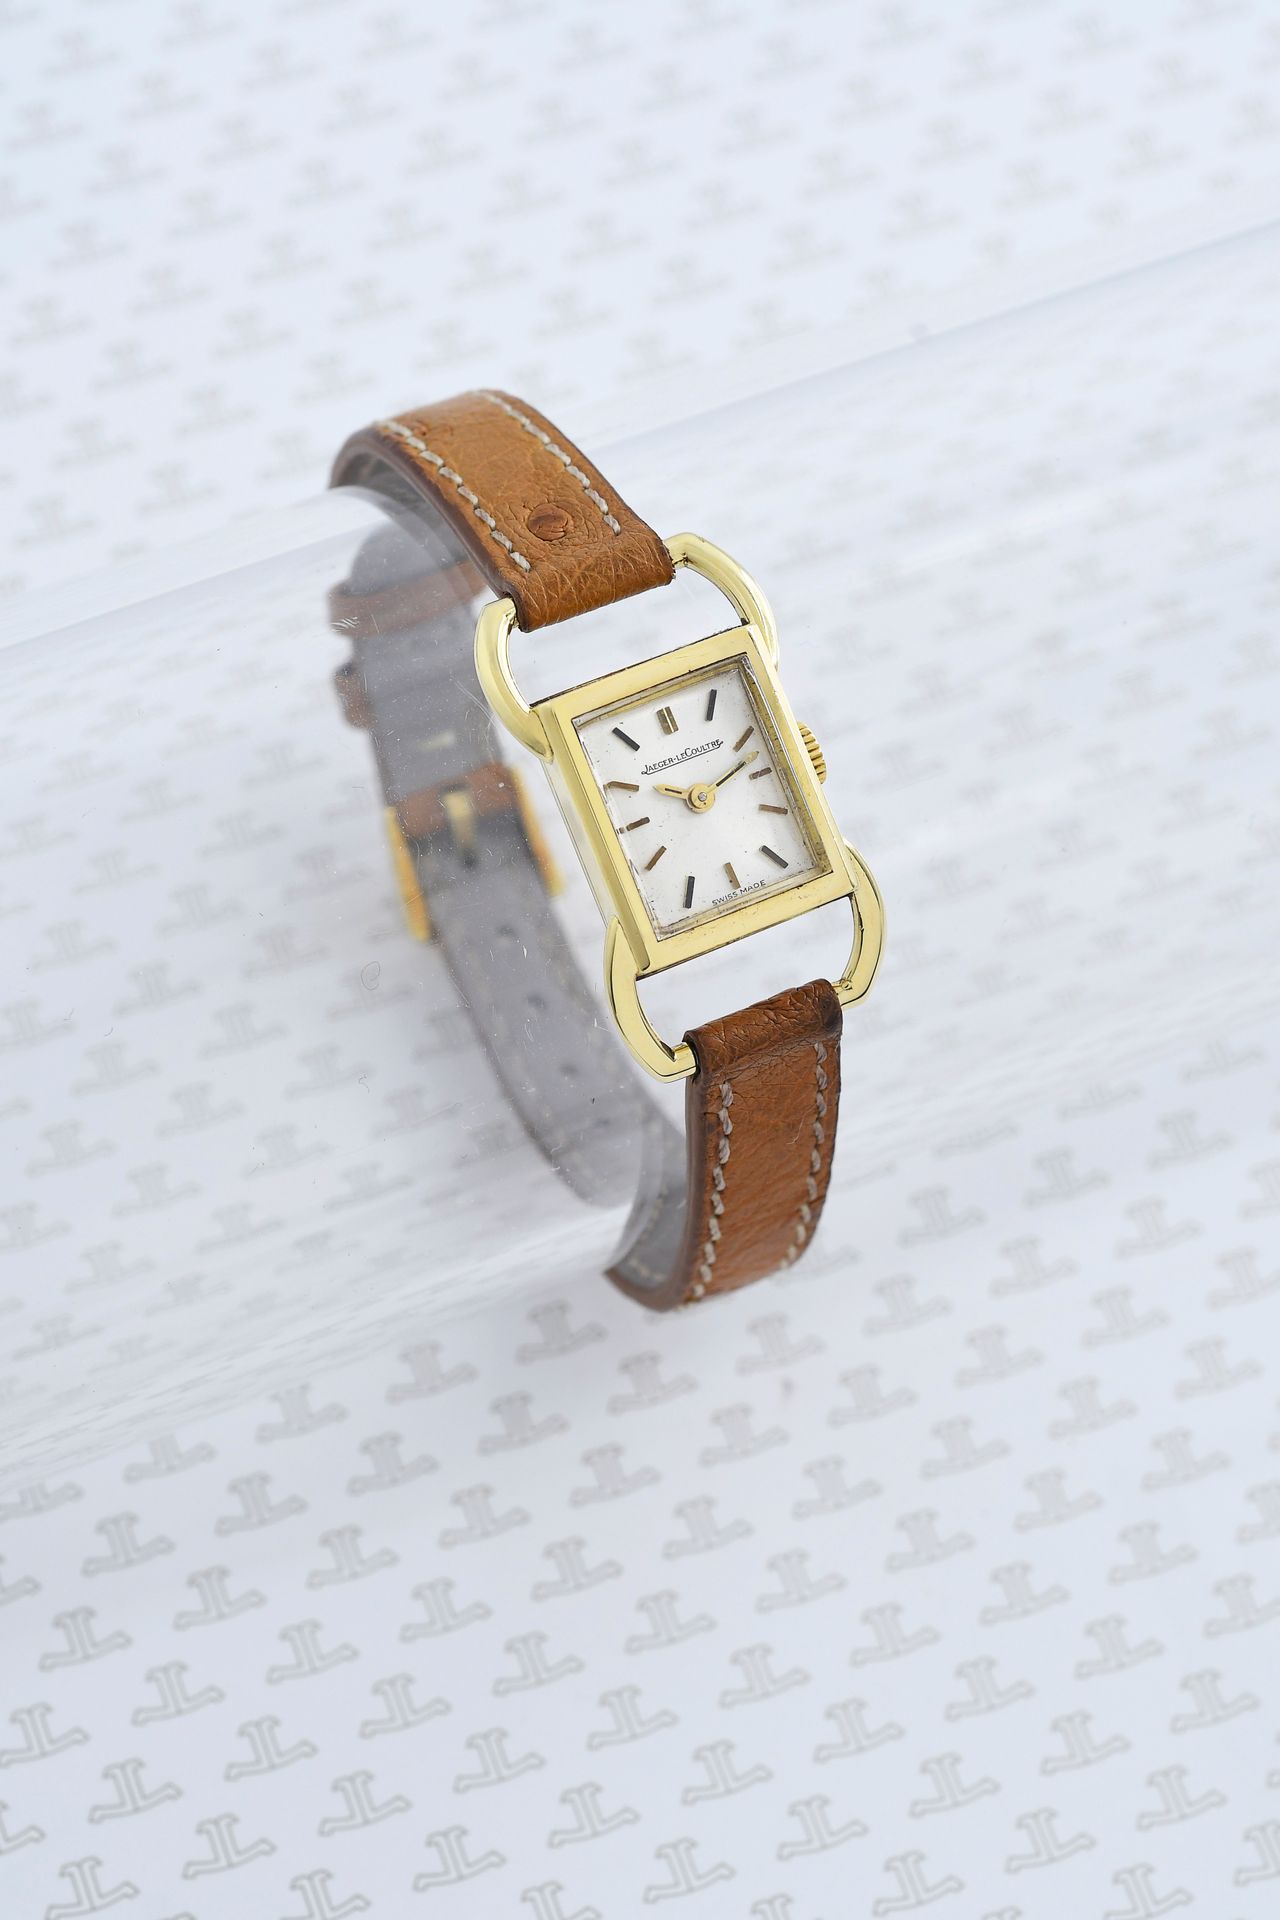 Null JAEGER-LECOULTRE (BABY STRIER / LADY - YELLOW GOLD No. 1101011A), 约 1950年

&hellip;